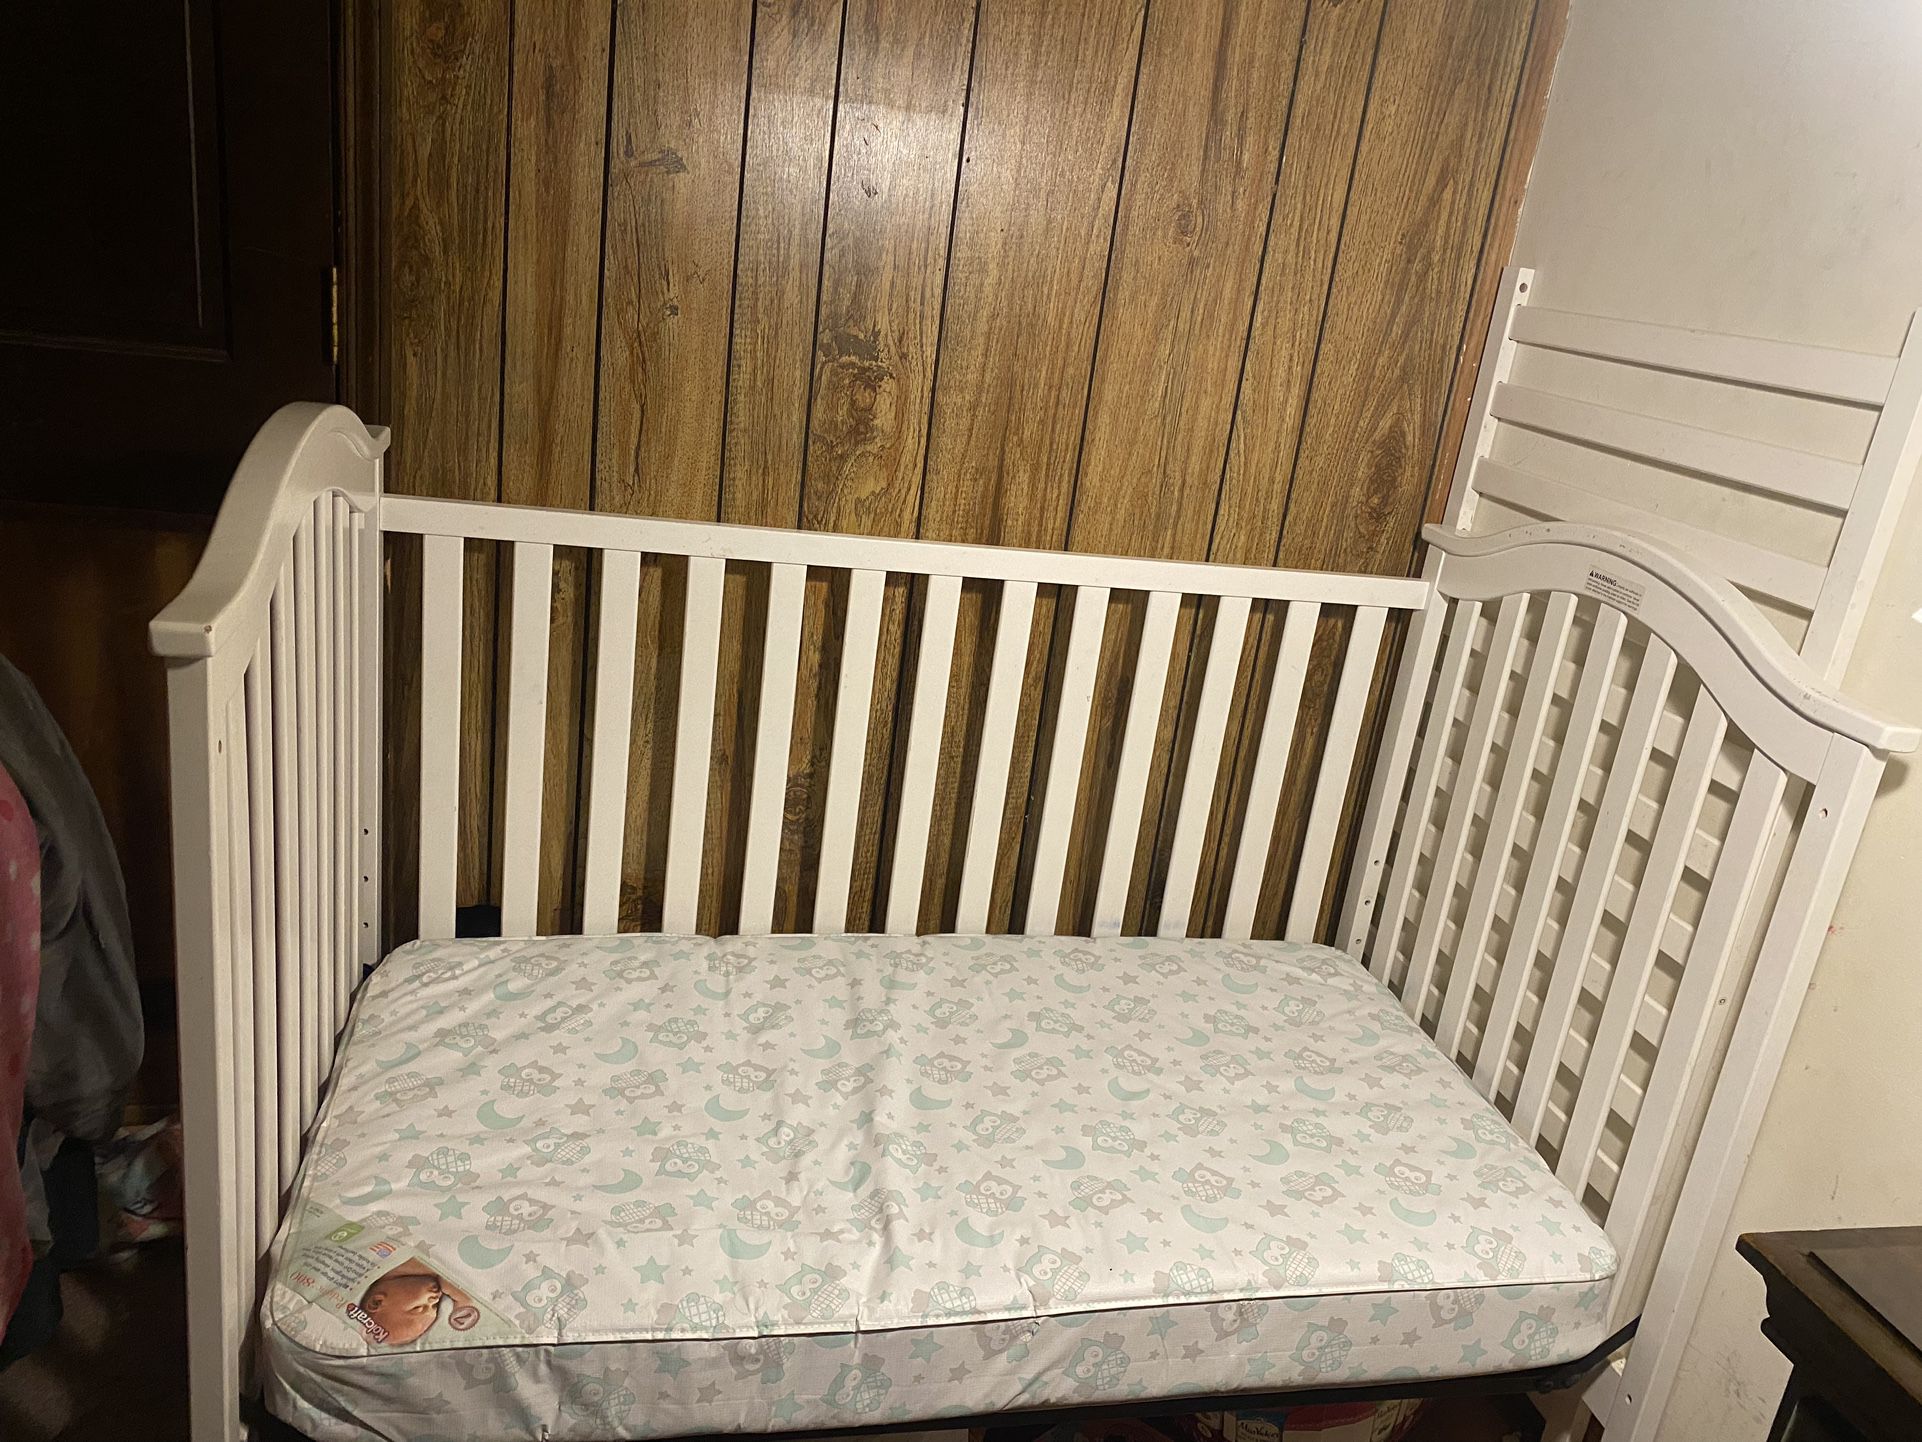 2 N 1 Baby Crib Convert To Toddler Bed 